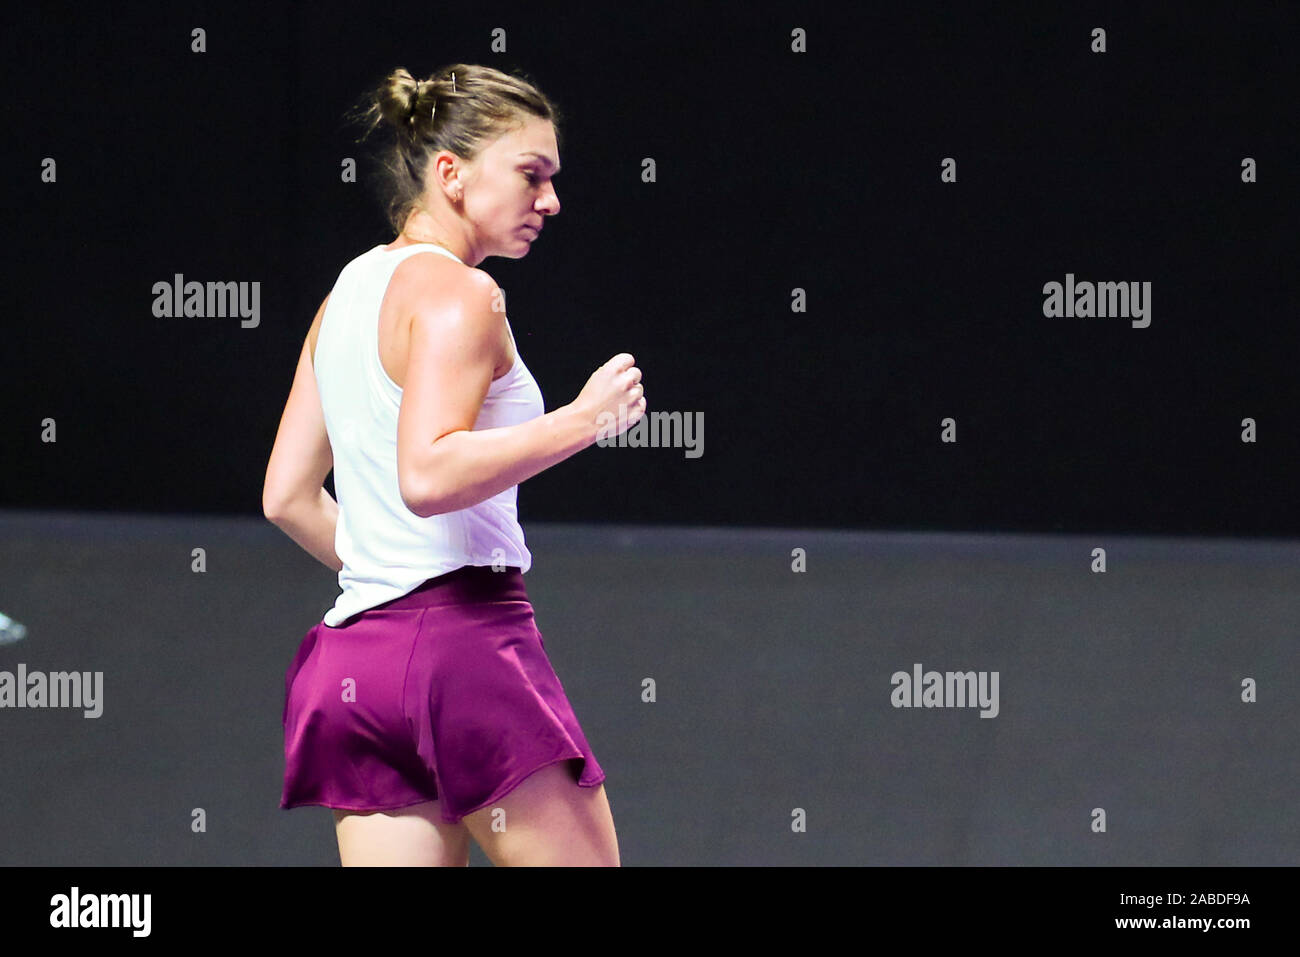 Romanian professional tennis player Simona Halep competes against Canadian professional tennis player Bianca Andreescu during a group match of WTA Fin Stock Photo